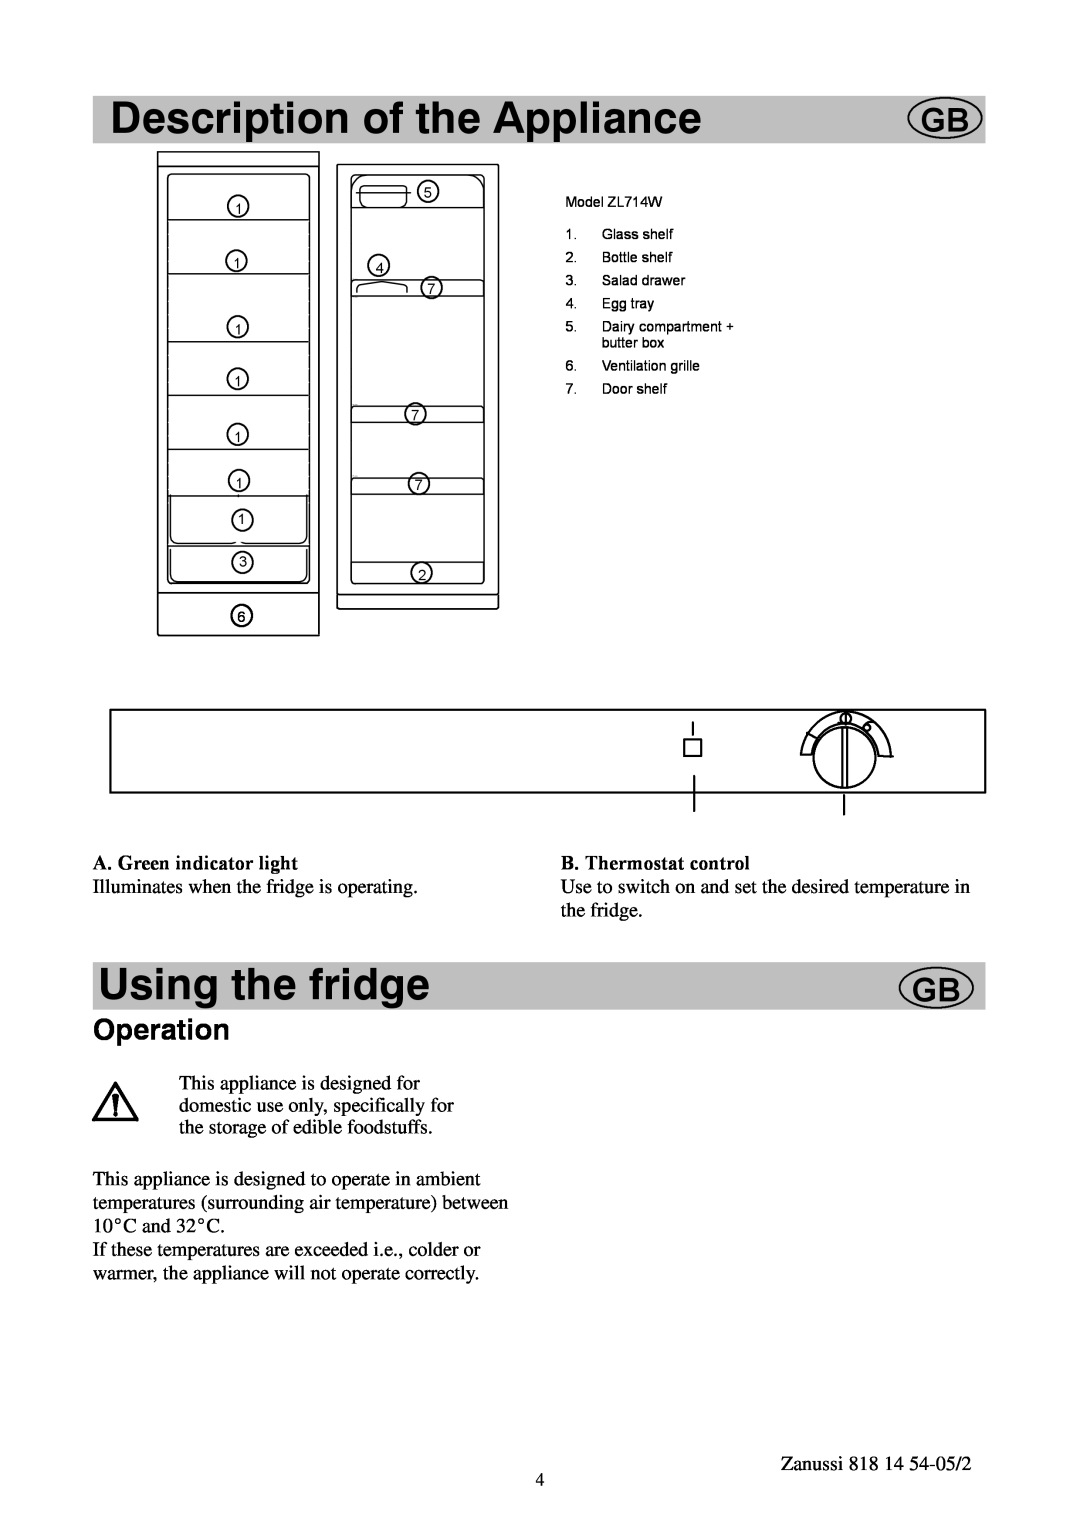 Zanussi ZL714W Description of the Appliance, Using the fridge, Operation, A. Green indicator light, B. Thermostat control 